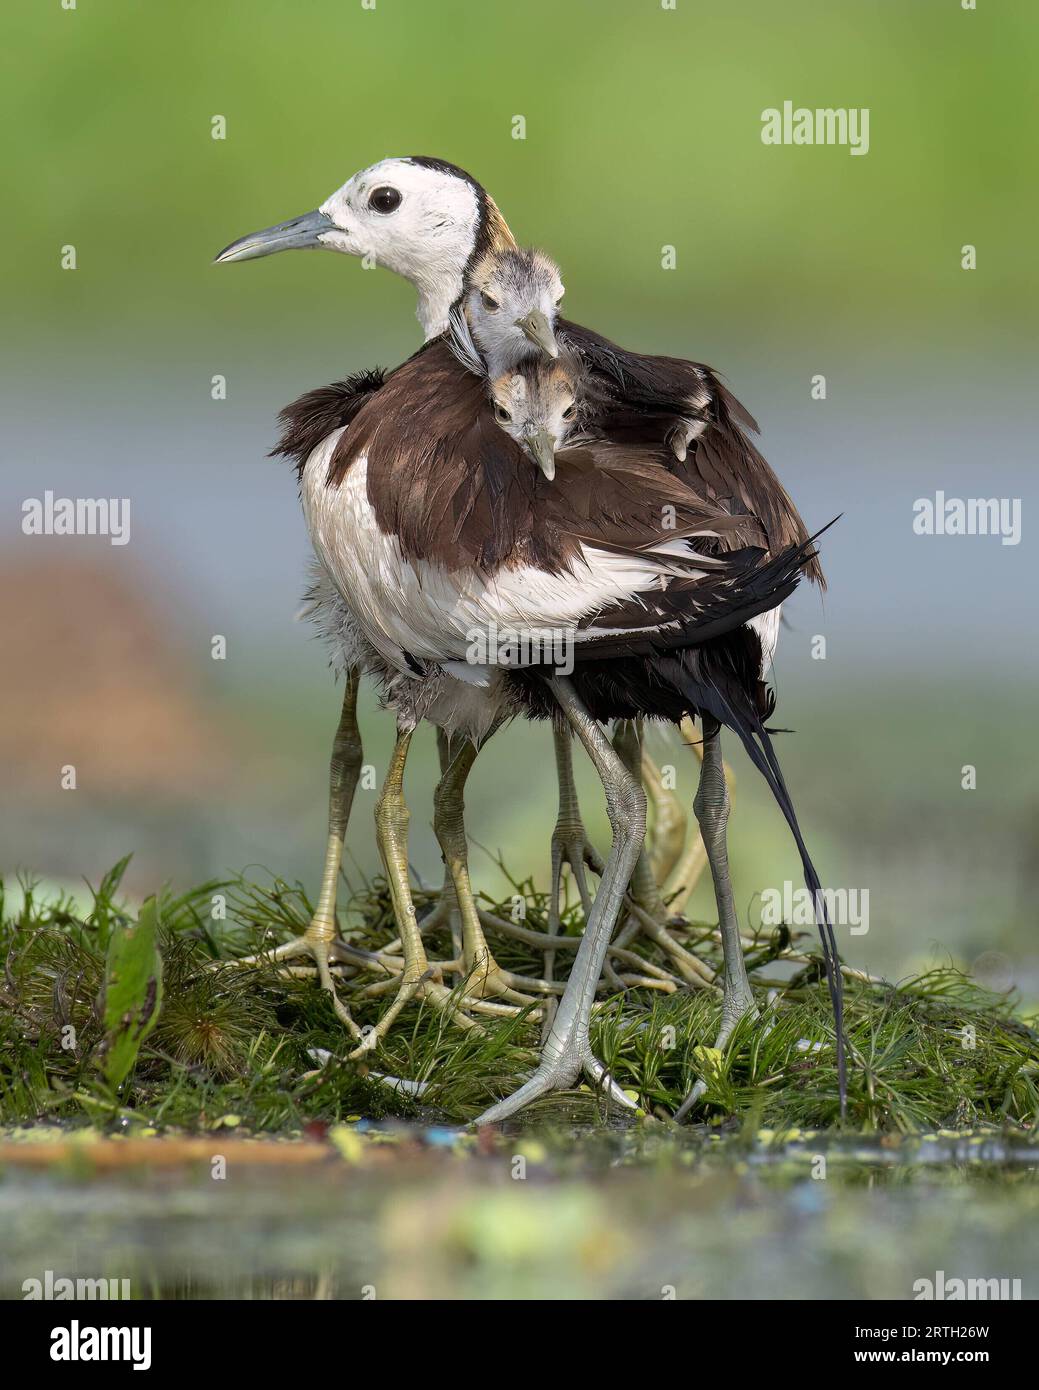 Father pheasant jacana portrait with two chicks nestled in his feathers. West Bengal, India: CUTE images of pheasant tailed Jacanas chicks seeking she Stock Photo